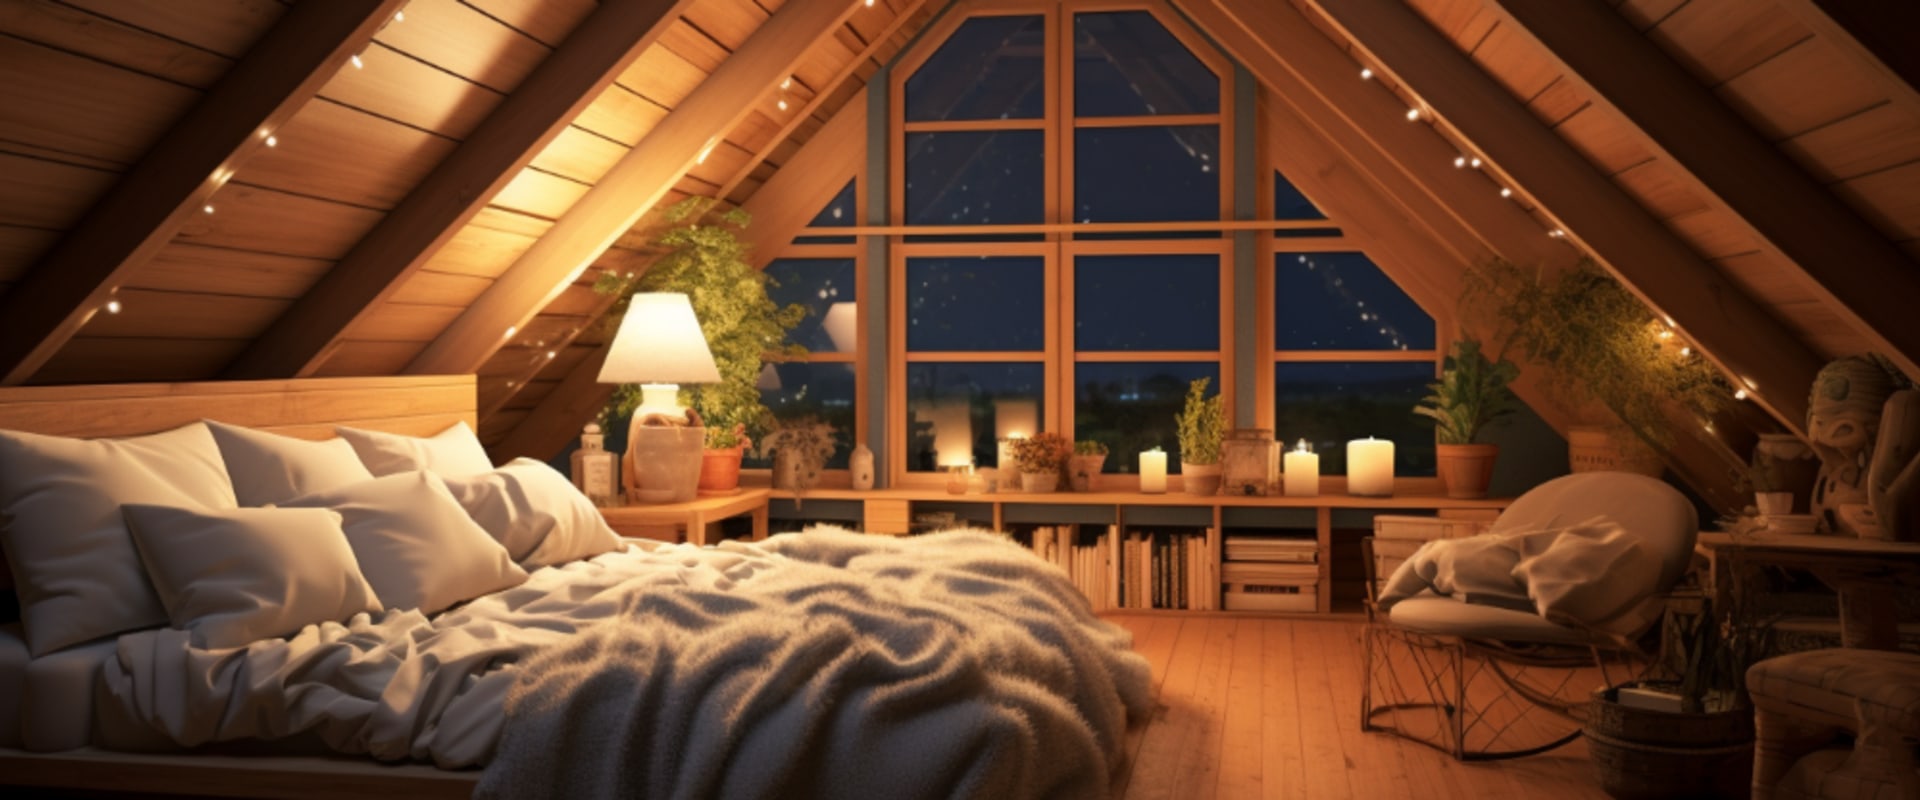 Transform Your Home With Professional Attic Insulation Installation Contractors in Jupiter FL